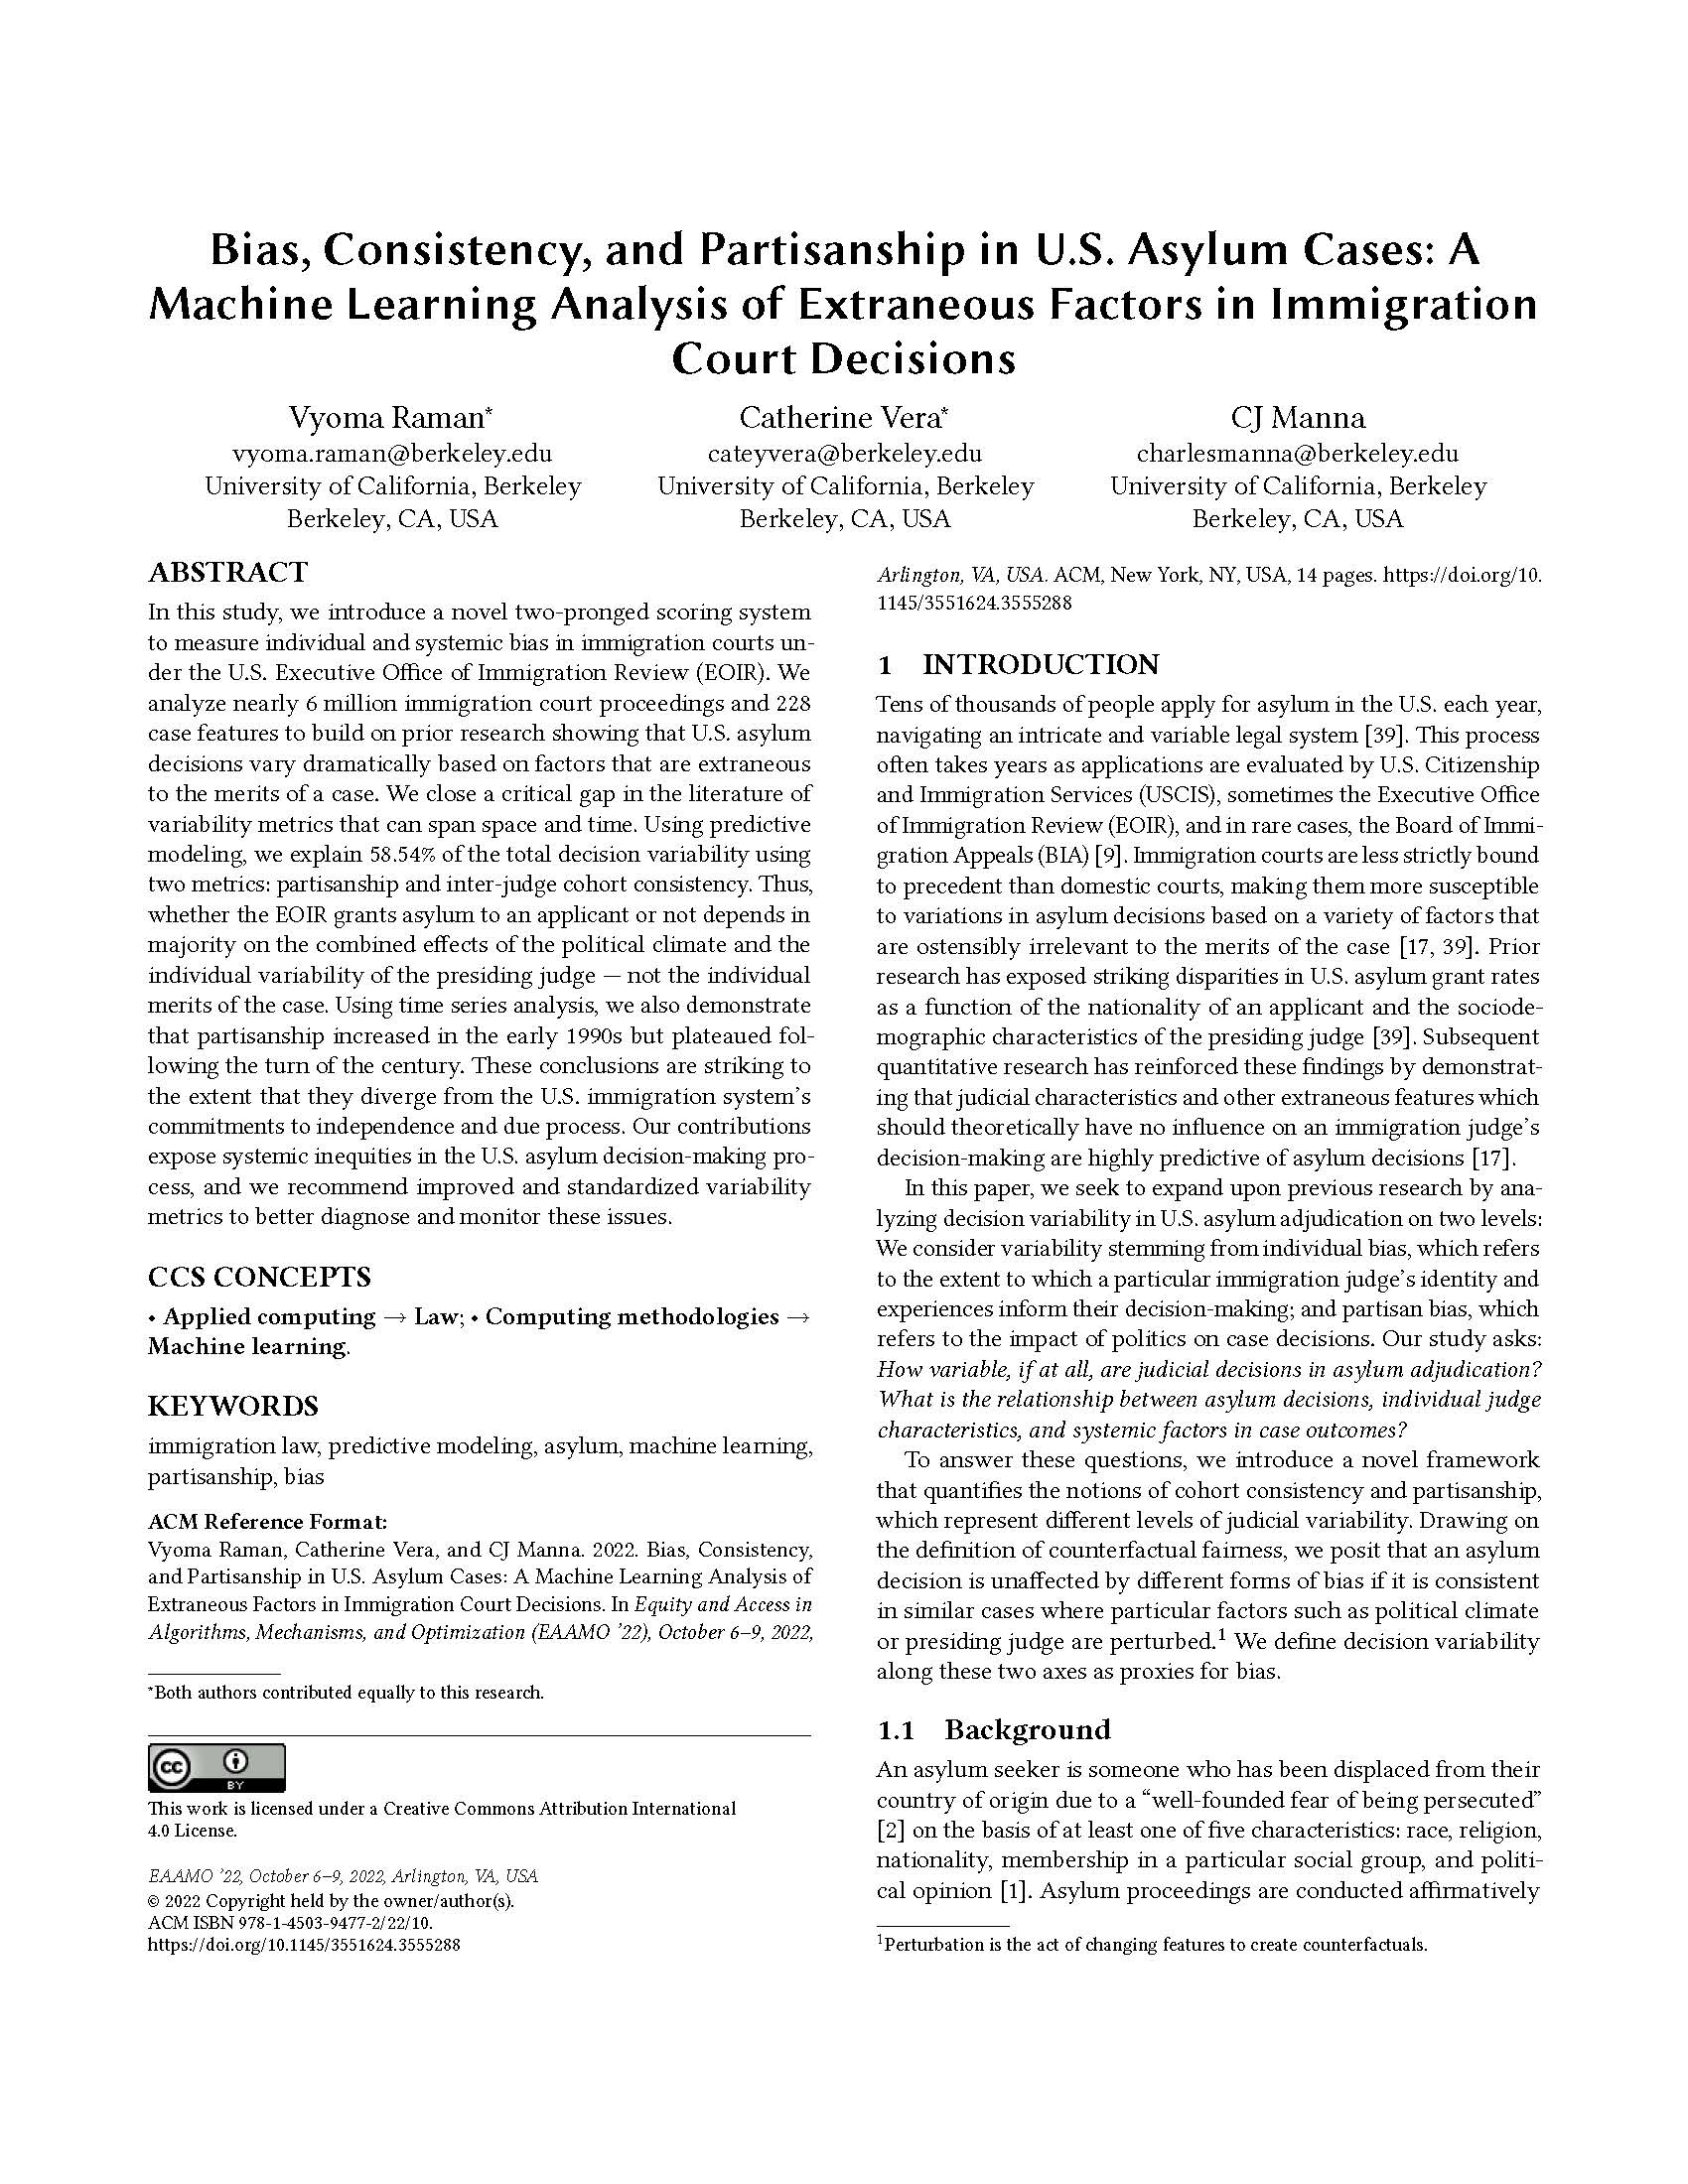 Pages from Bias, Consistency, and Partisanship in U.S. Asylum Cases- A Machine Learning Analysis of Extraneous Factors in Immigration Court Decisions